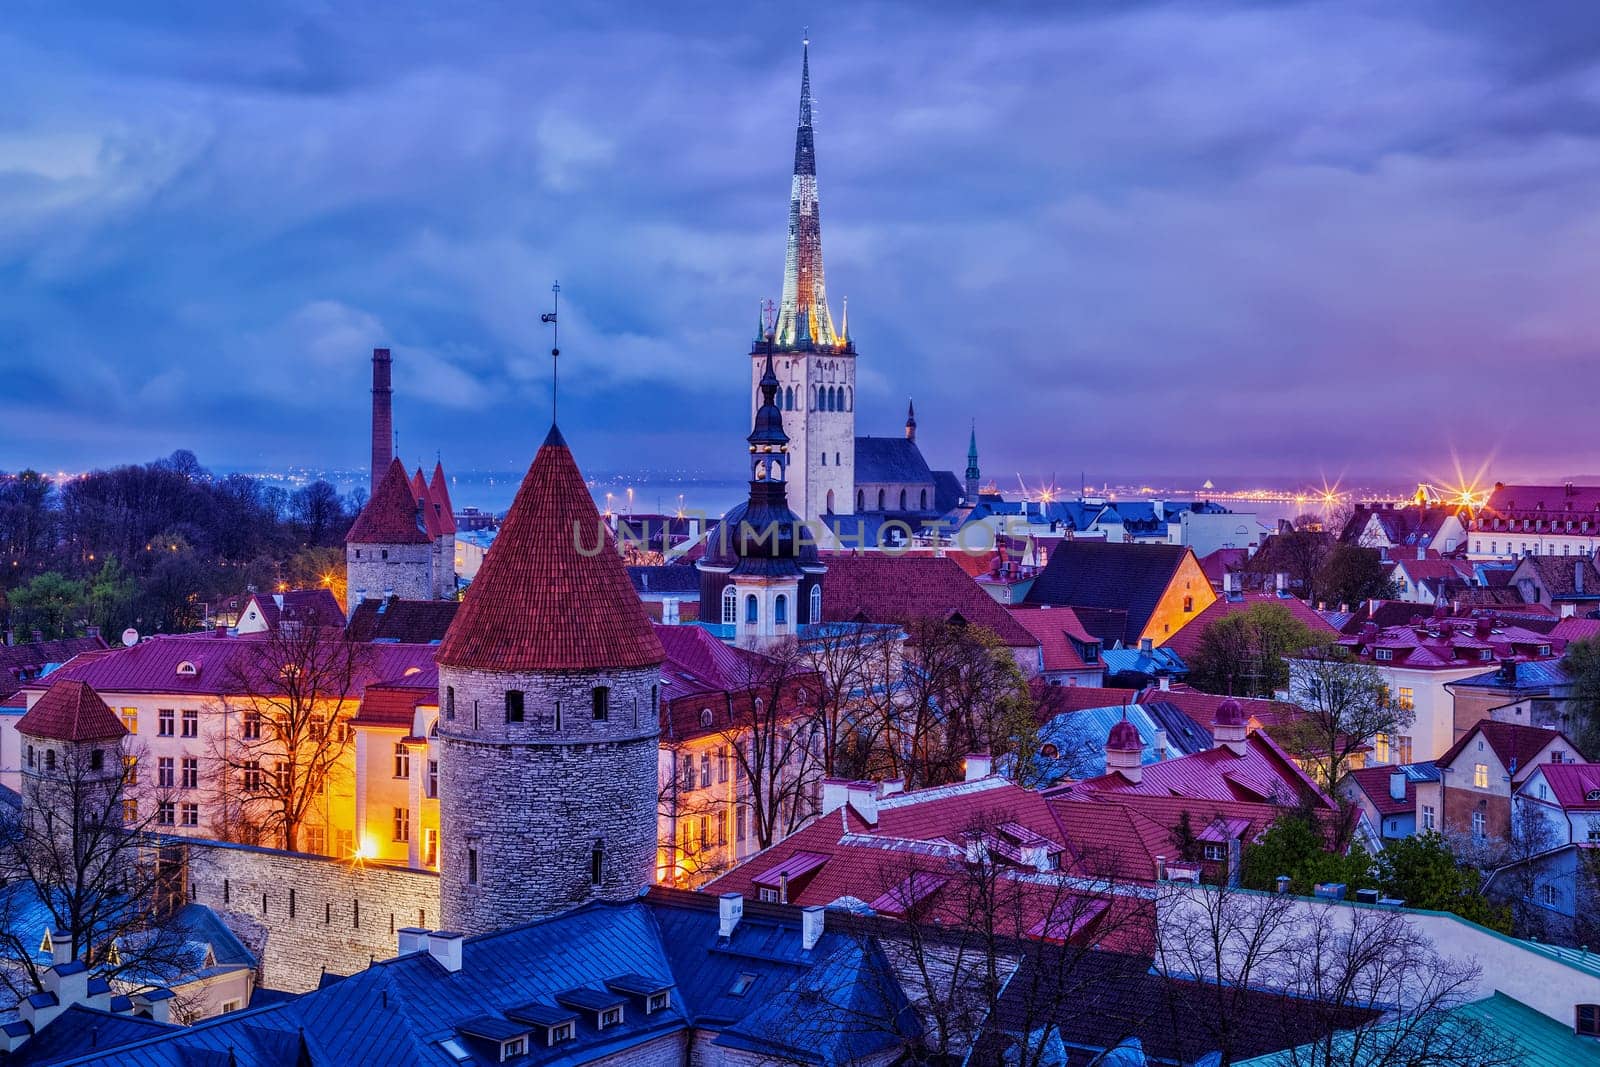 Aerial view of Tallinn Medieval Old Town with St. Olaf's Church and Tallinn City Wall illuminated in evening, Estonia